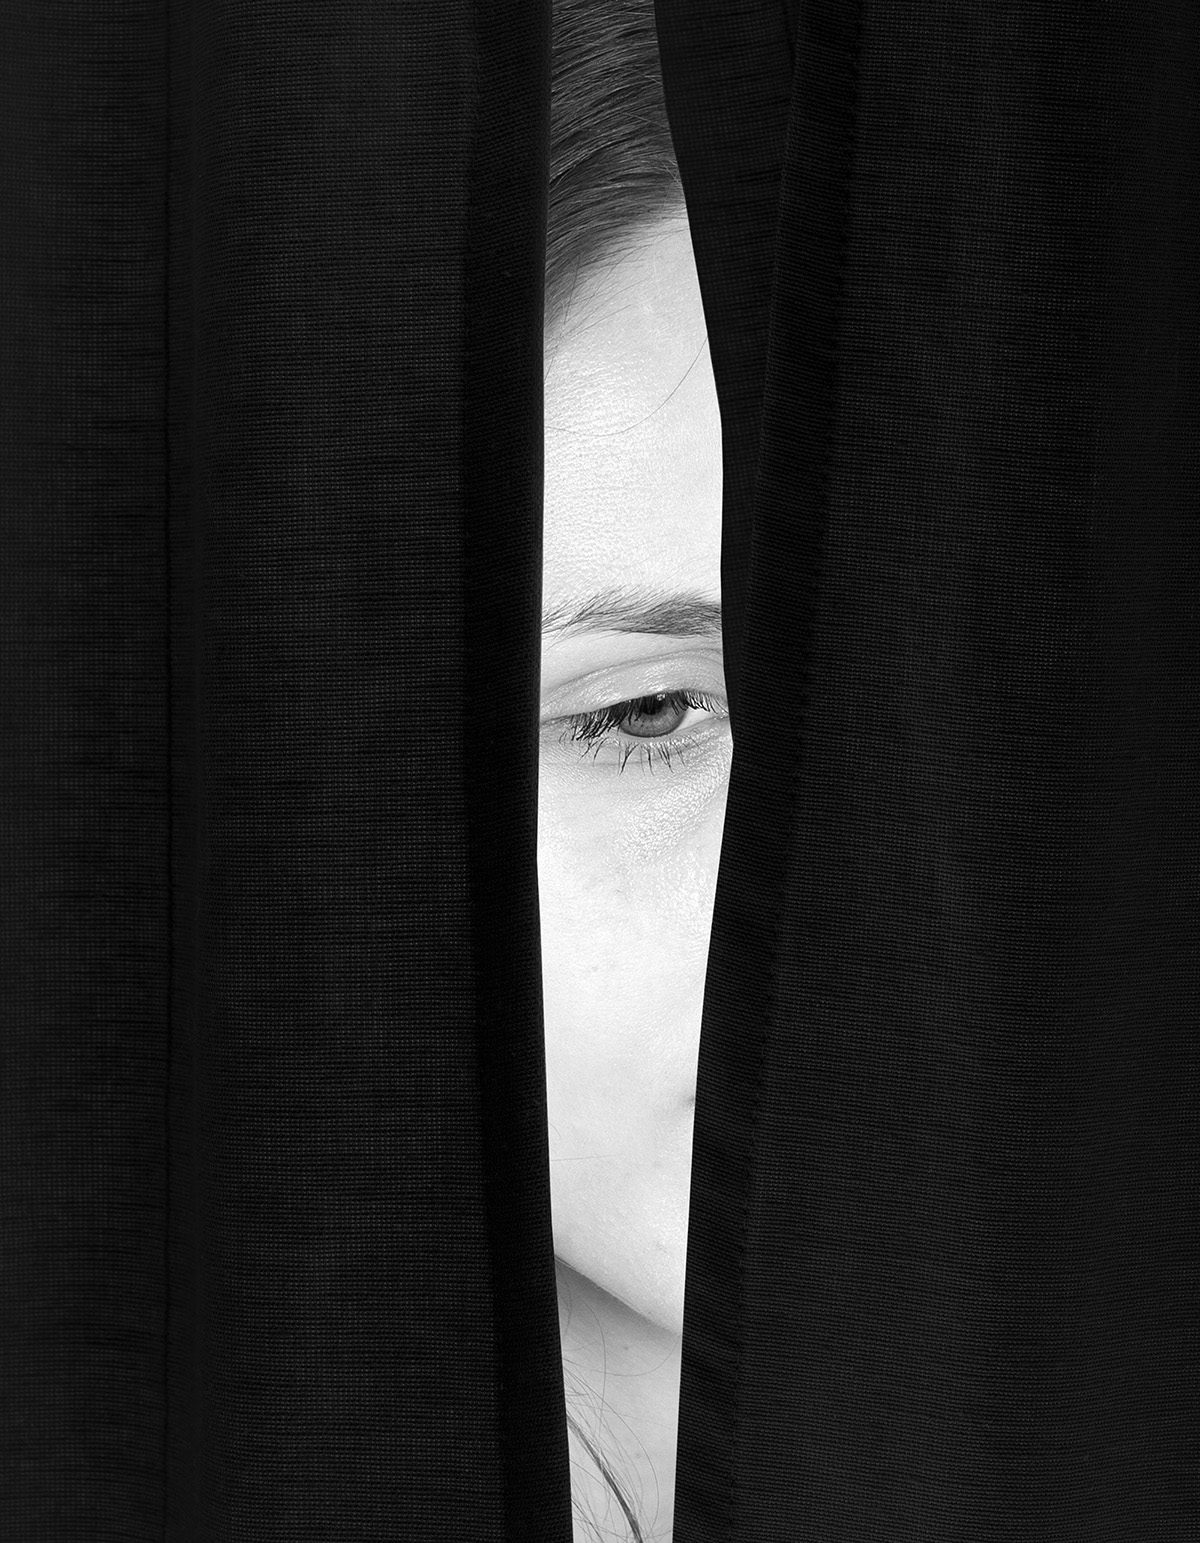 Image by Brea Souders for the New York Times shows a sliver of a woman's face visible through a cloak of black material